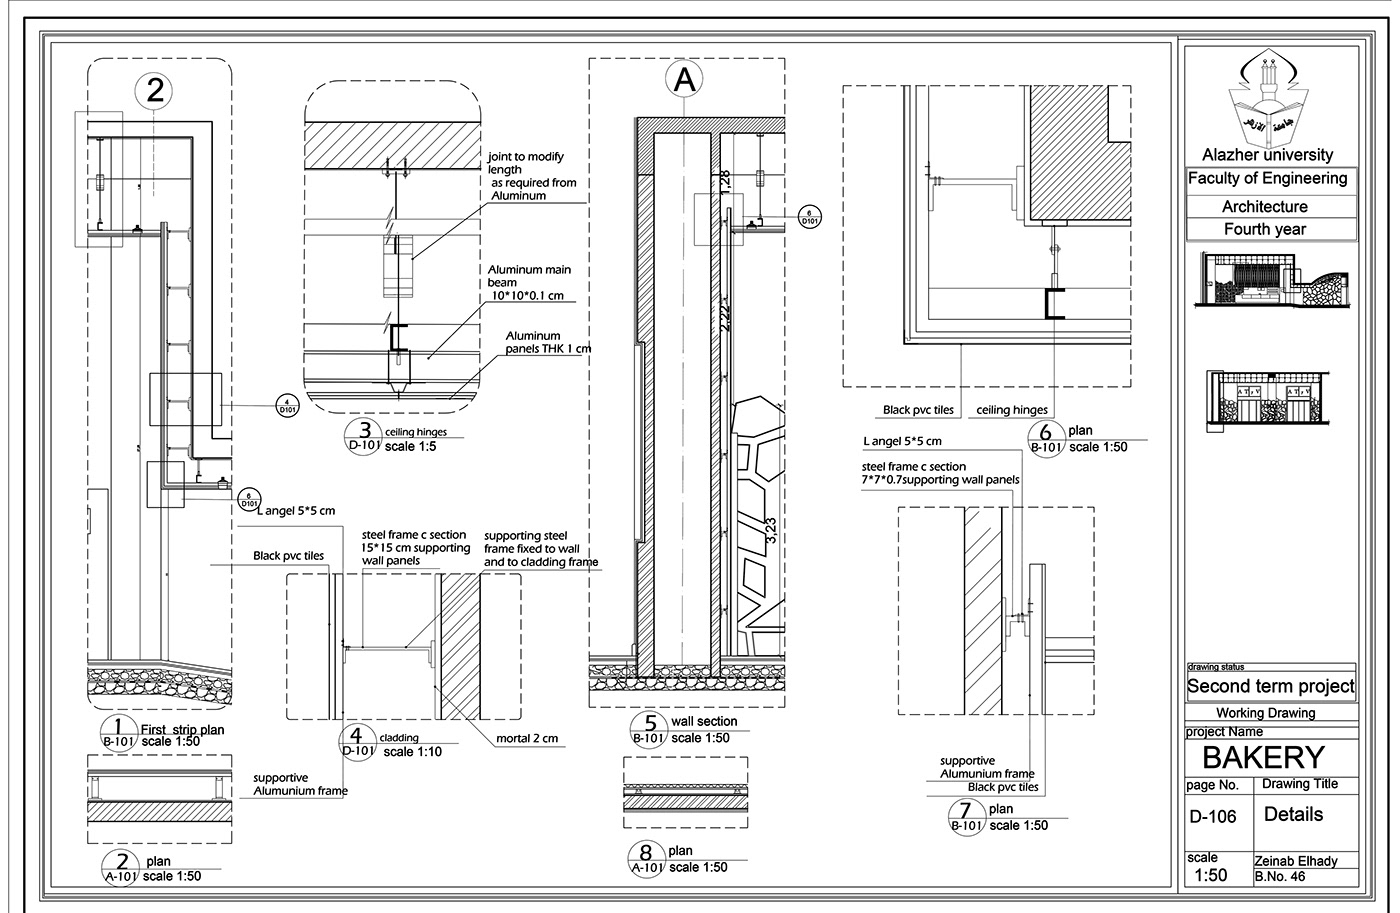 working Interior design shop drawing architecture details bakery cladding wood